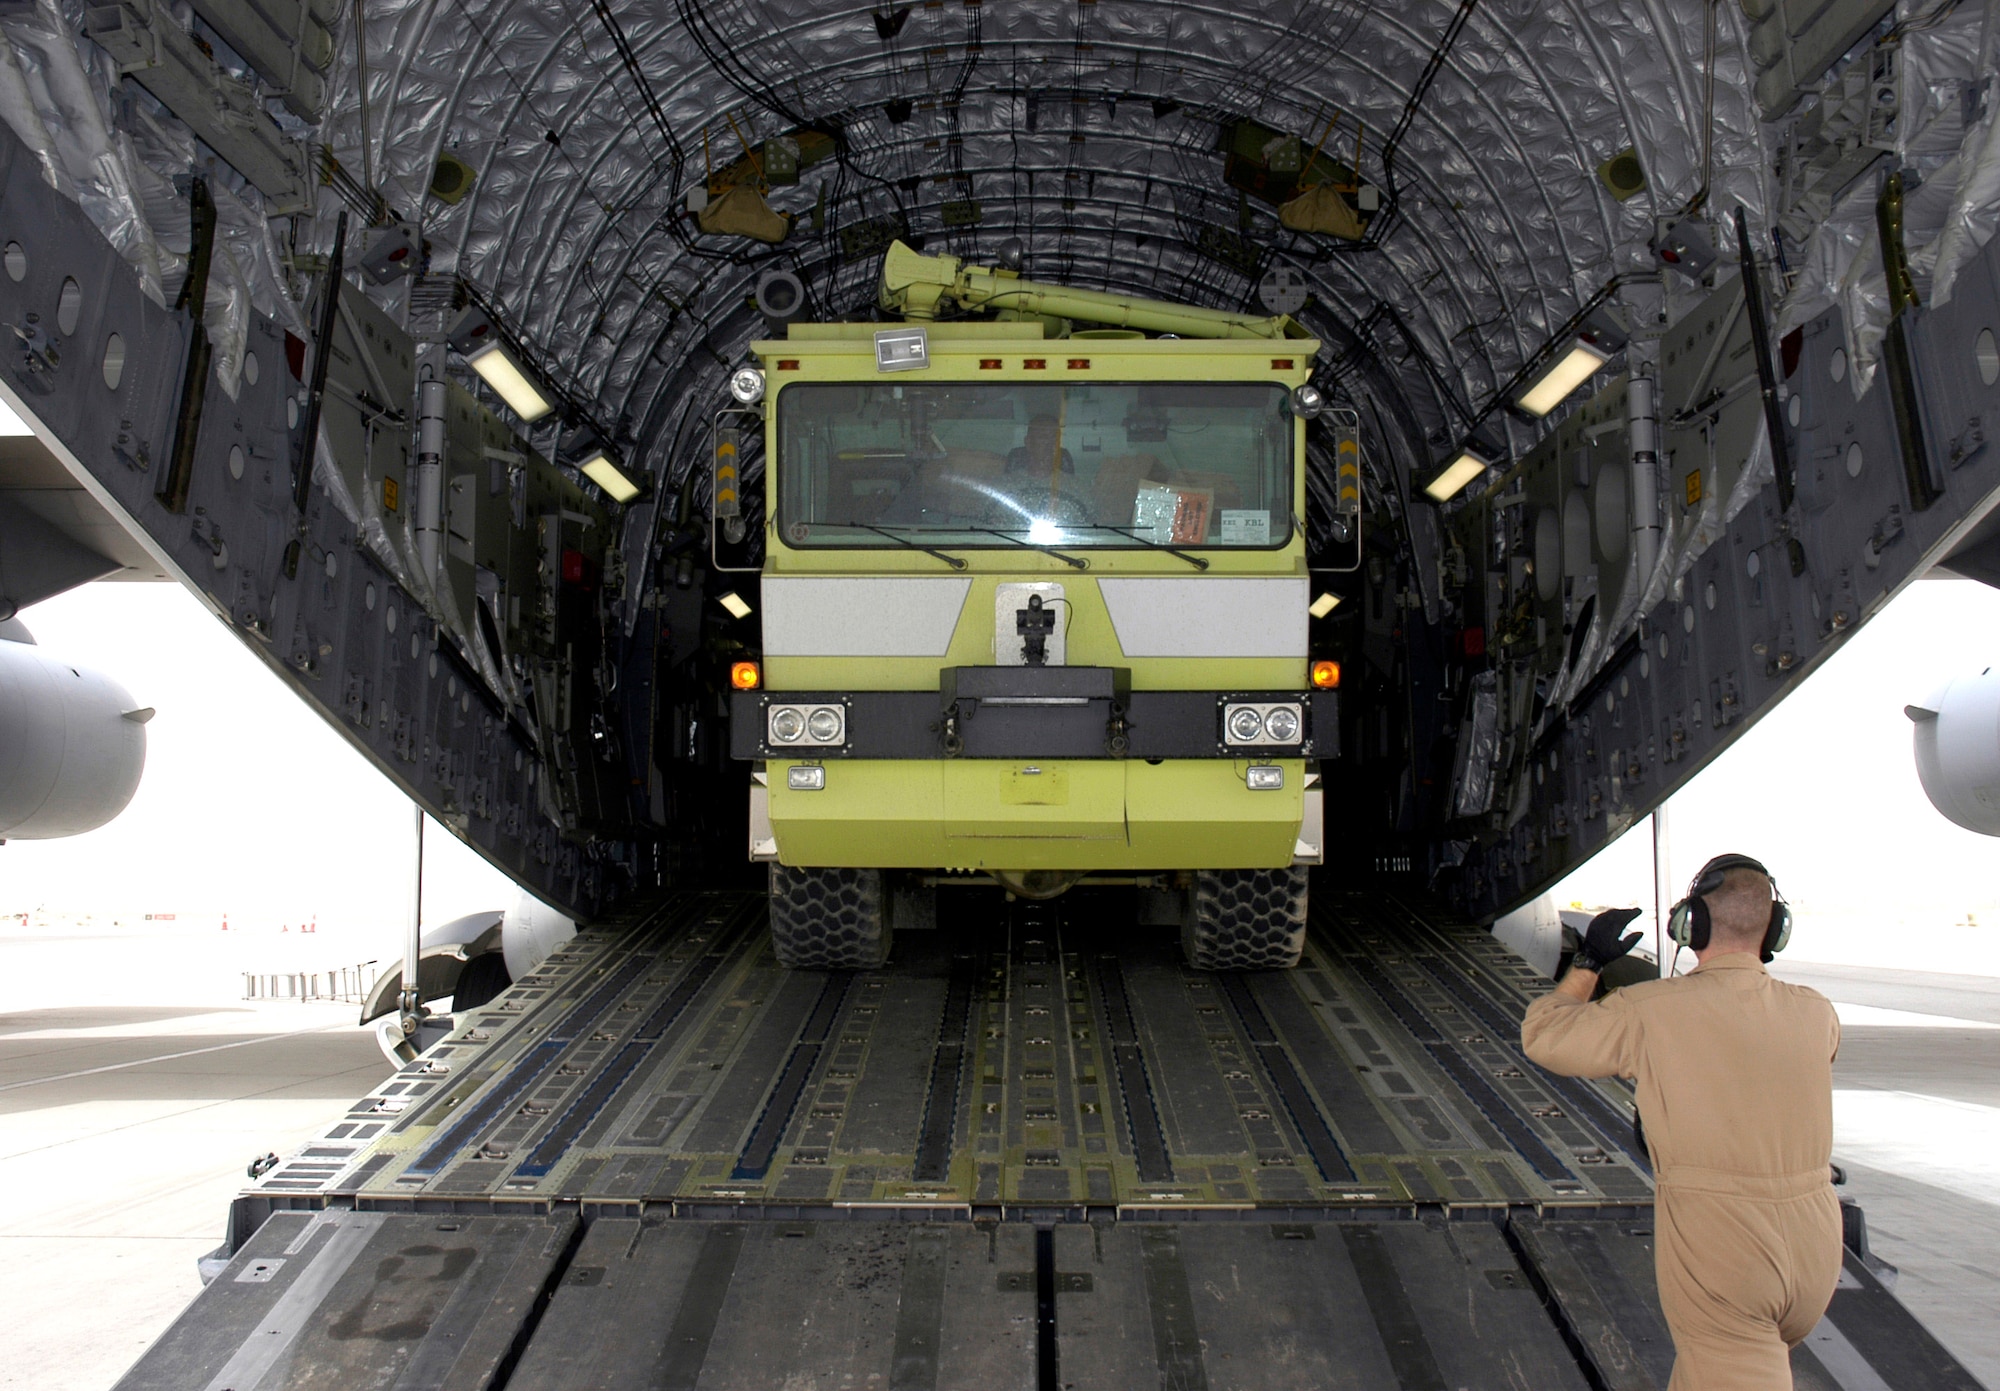 Airmen from the 386th Expeditionary Logistics Readiness Squadron load a fire and rescue truck April 19 inside a C-17 Globemaster III in Southwest Asia. The truck is one of two donated by Baltimore officials and bound for Mazar-i-Sharif Airport in Northern Afghanistan. (U.S. Air Force photo/Staff Sgt. Ian Carrier)